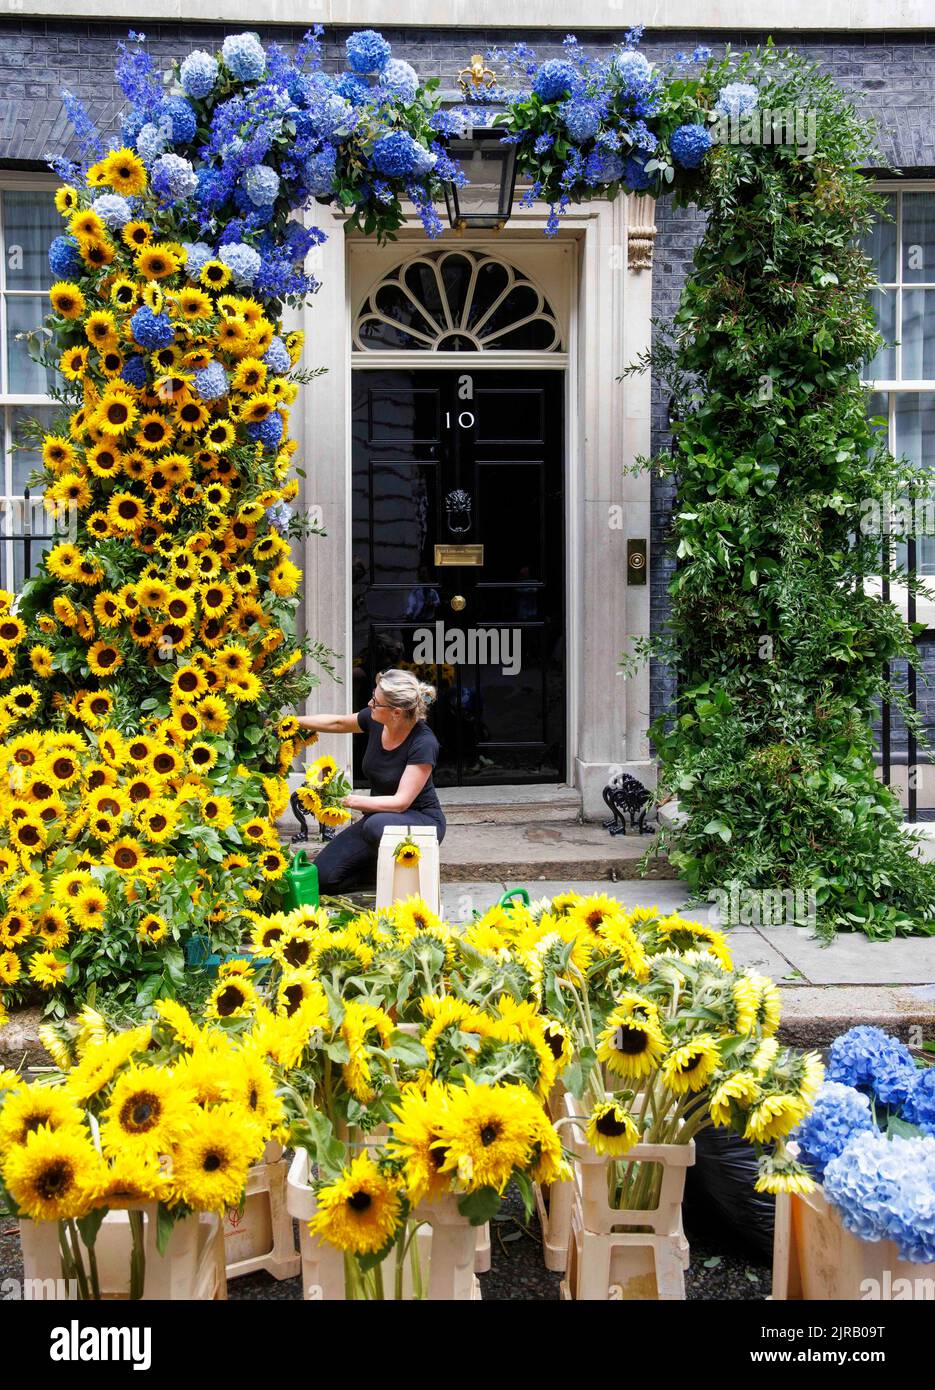 London, UK 23 Aug 2022The finishing touches are put on the floral display at Number 10 Downing Street to mark independence day for Ukraine which is tomorrow, August 24th. Credit: Mark Thomas/Alamy Live News Stock Photo